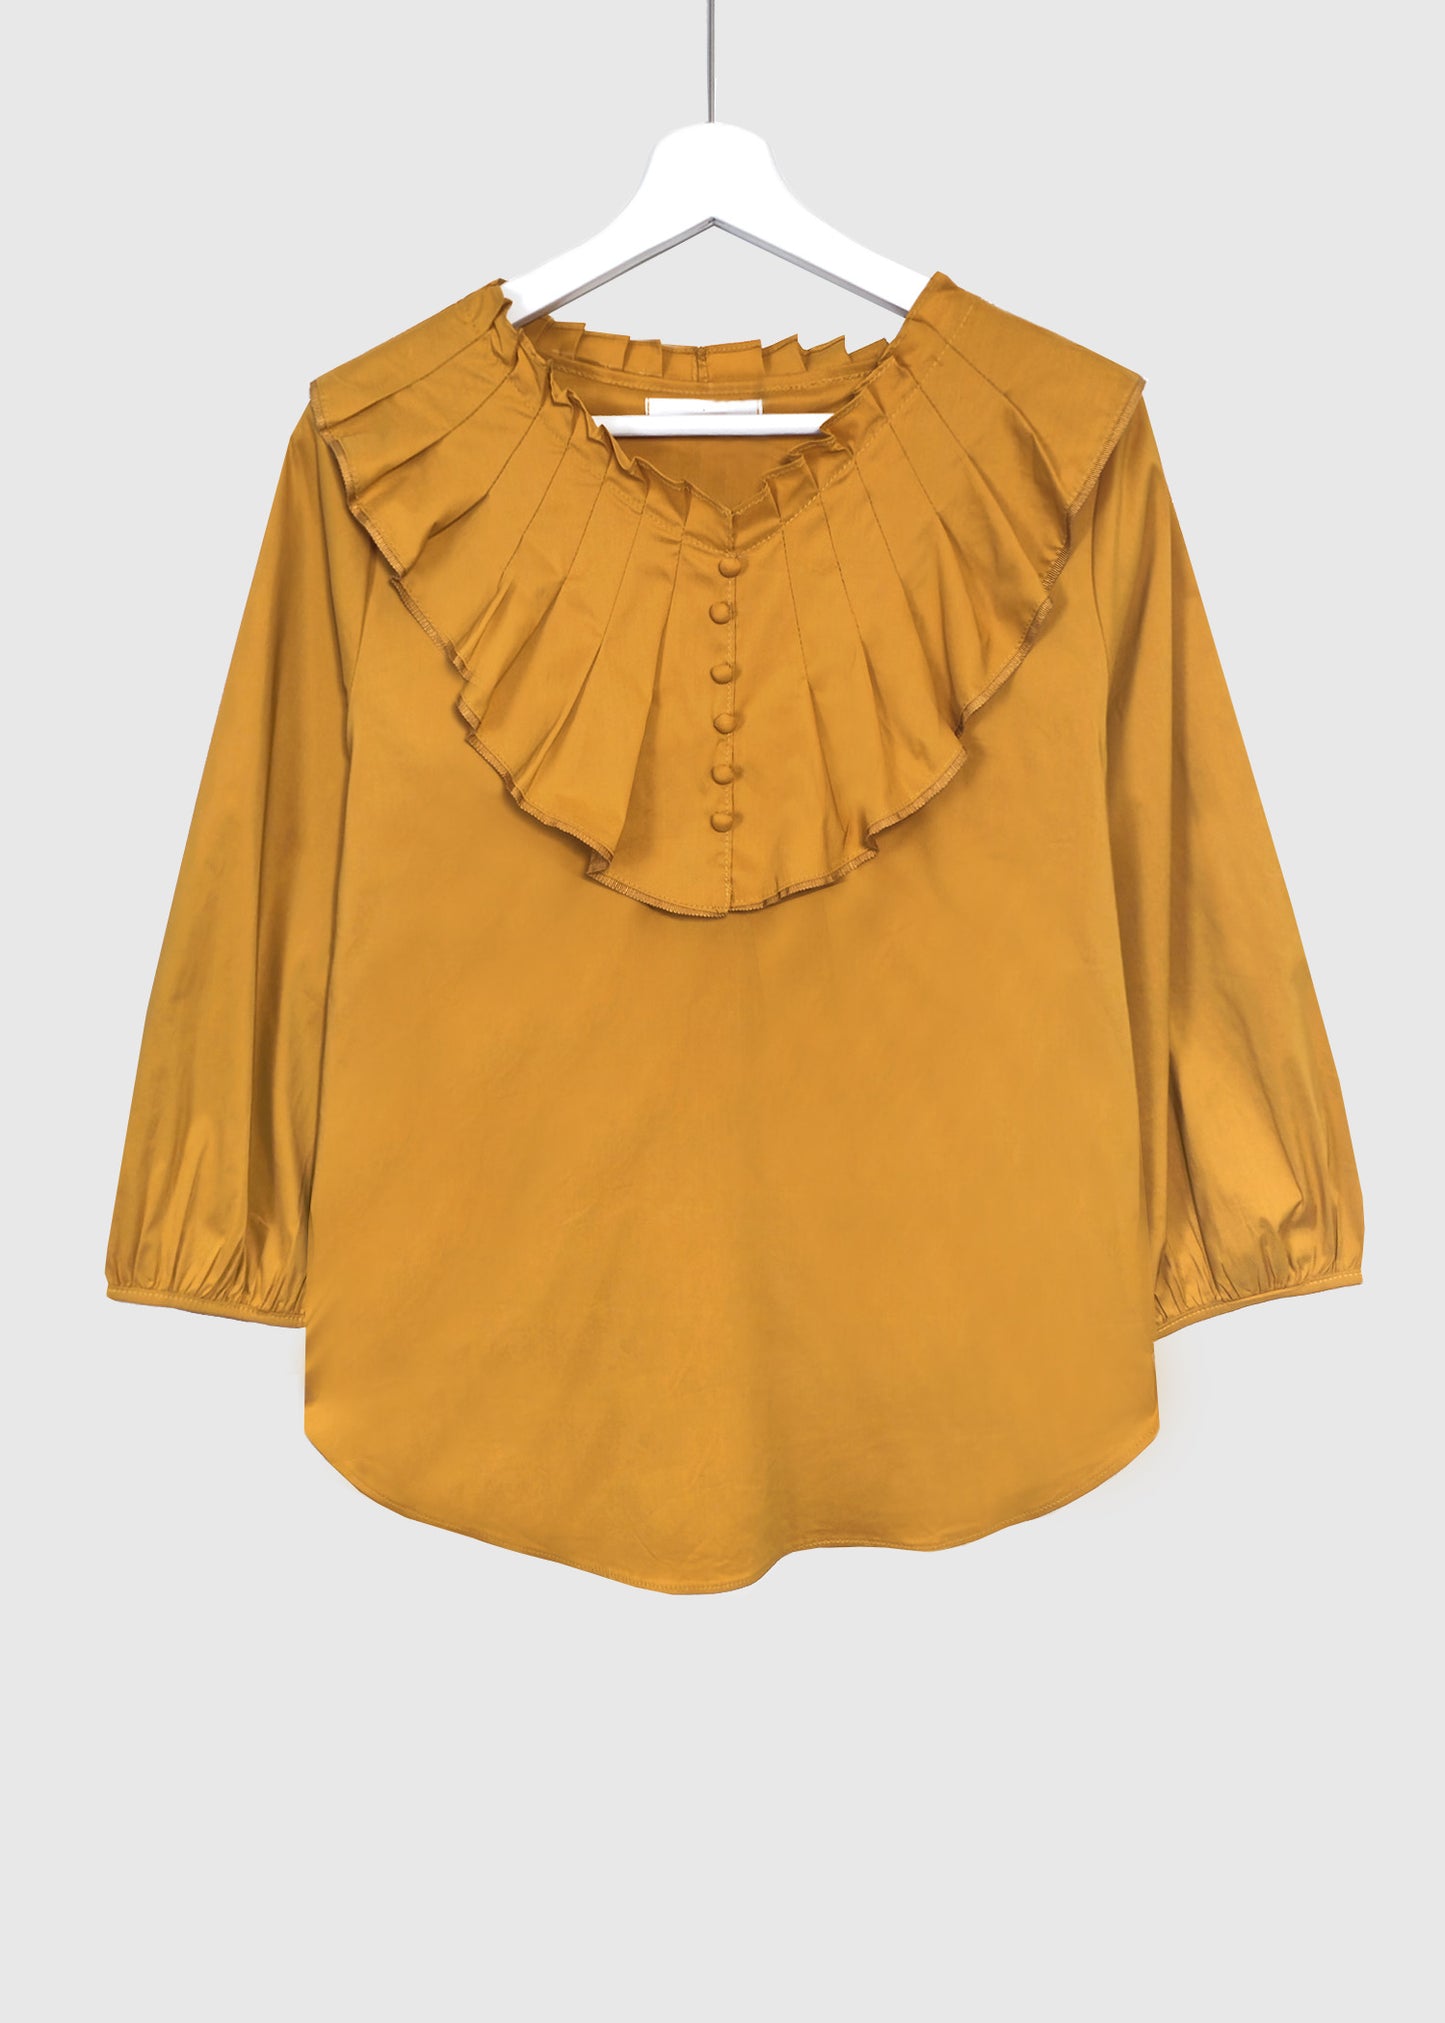 AUDREY Pleated Collar Top